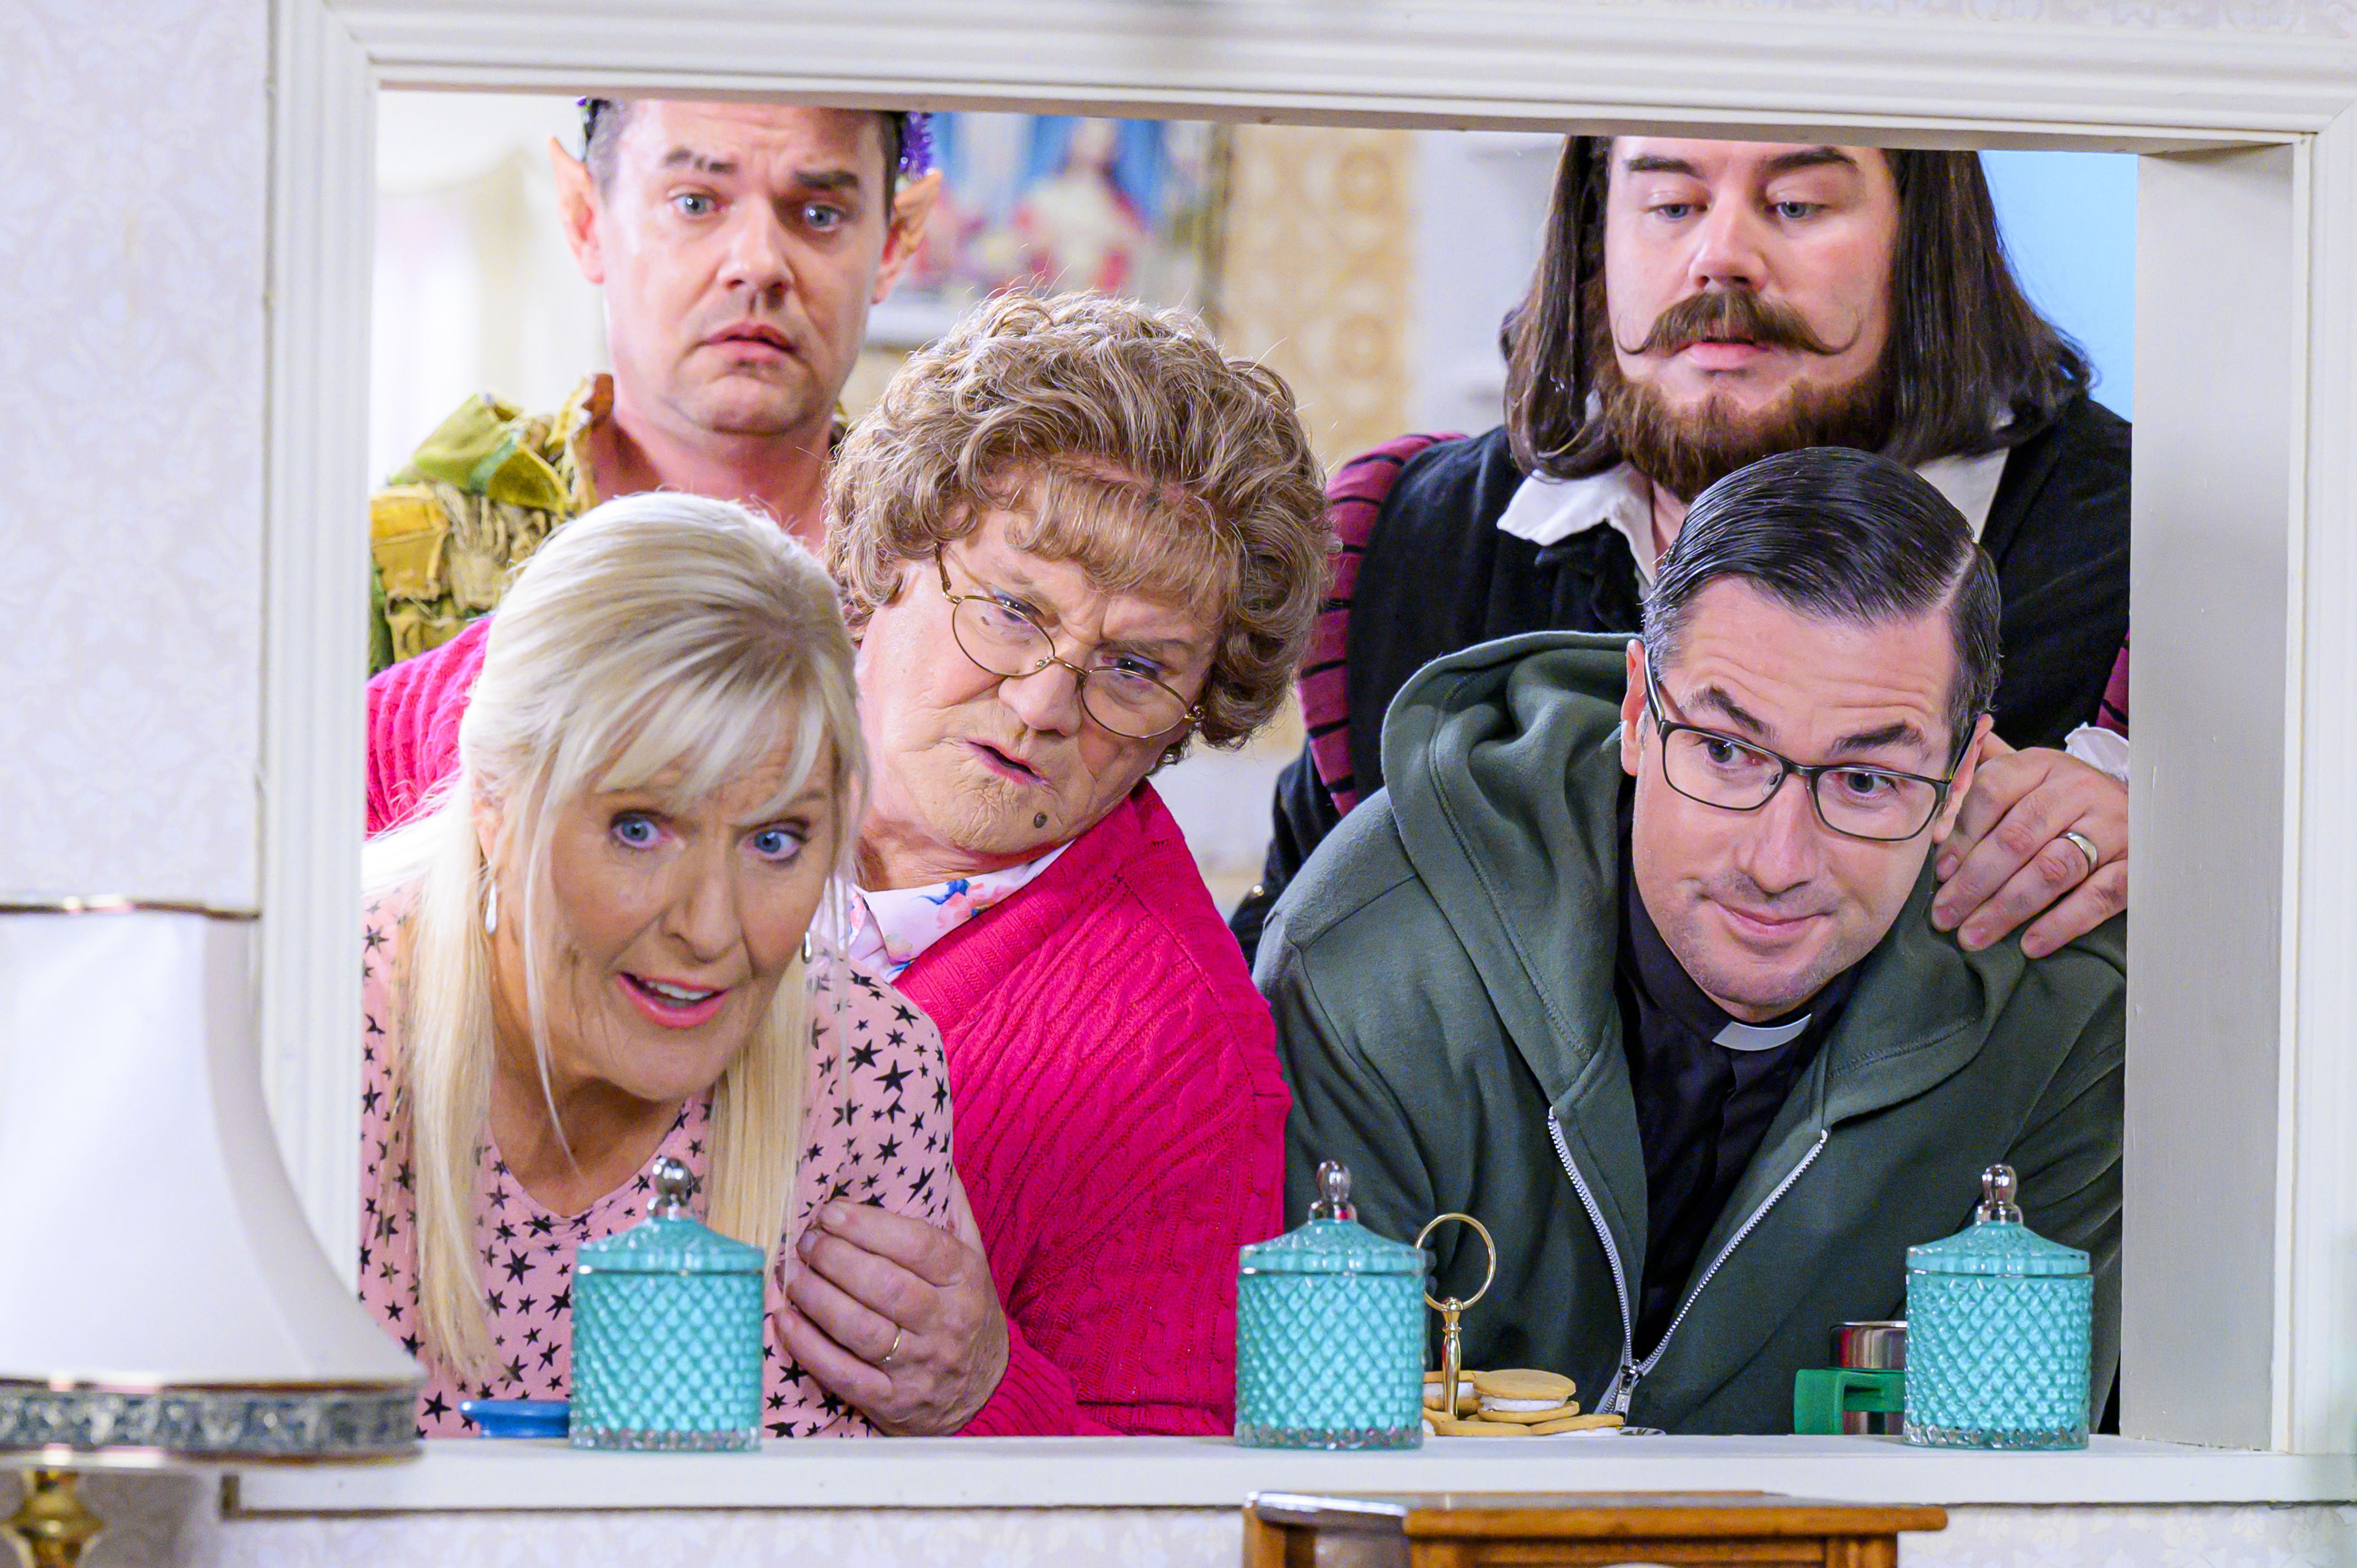 Mrs Brown's Boys stars Jennifer Gibney and Brendan O'Carroll give us a sneak peek into their Christmas traditions.